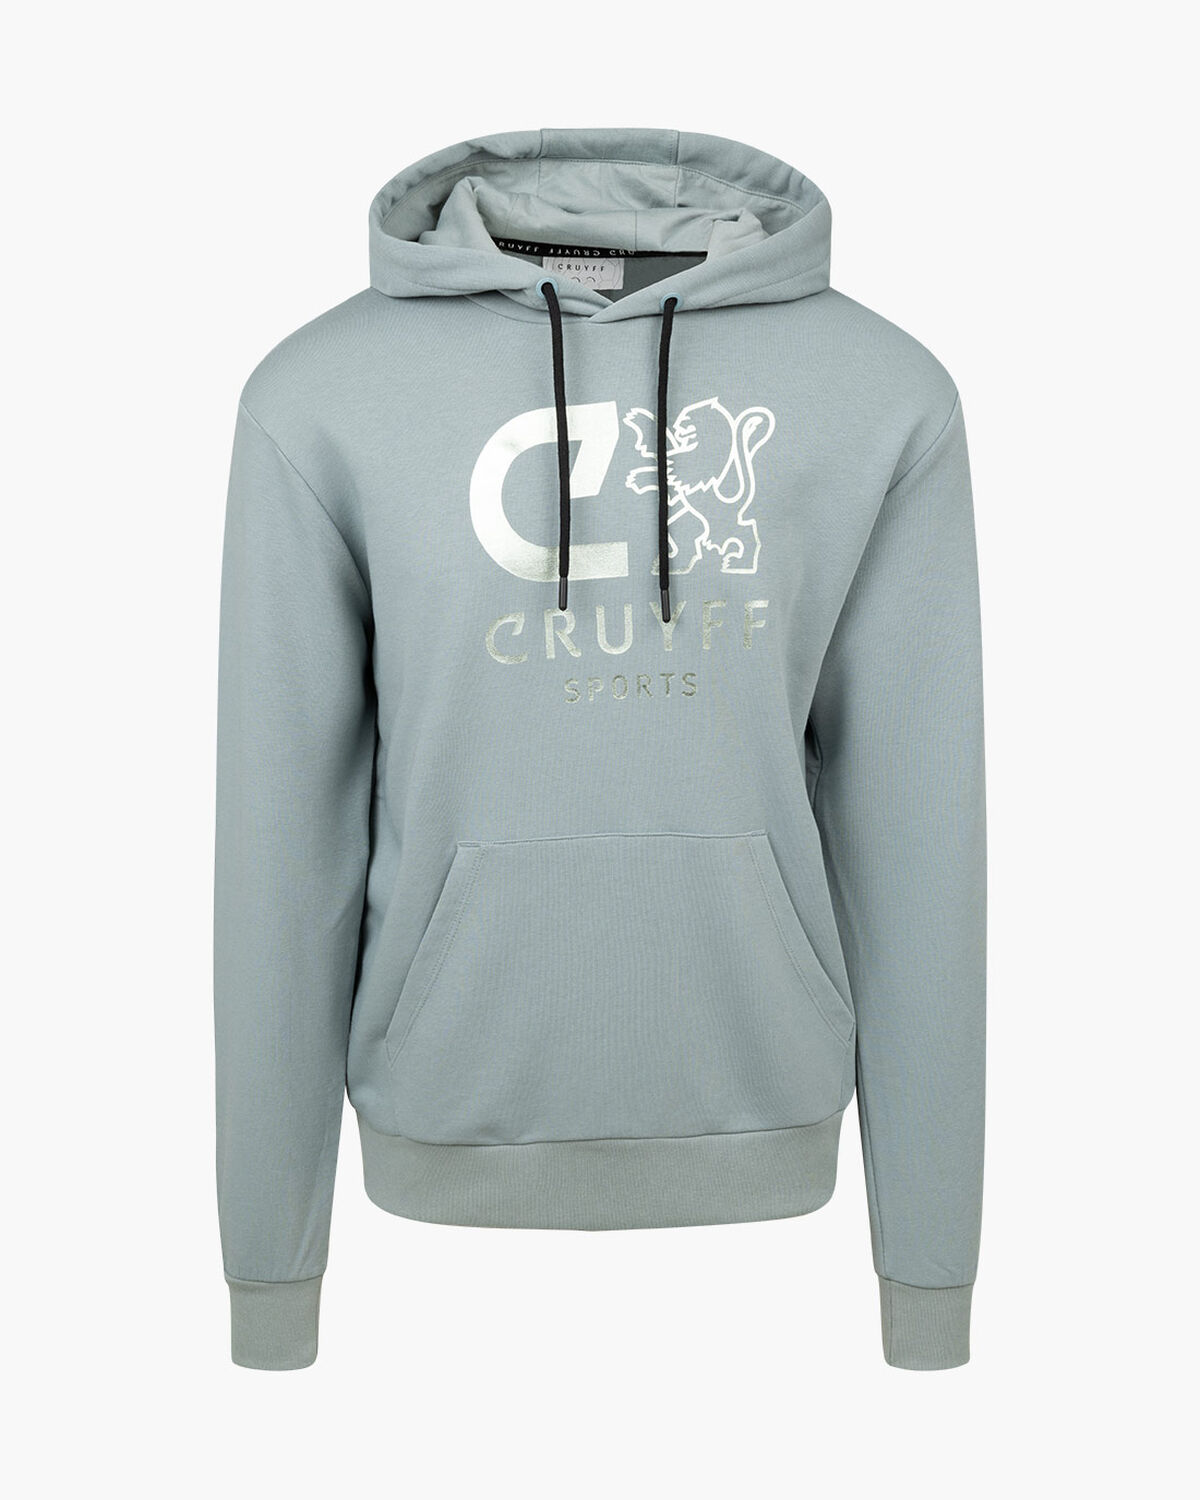 Do Hoodie - 80% Cotton / 20% Polyester, Blue, hi-res